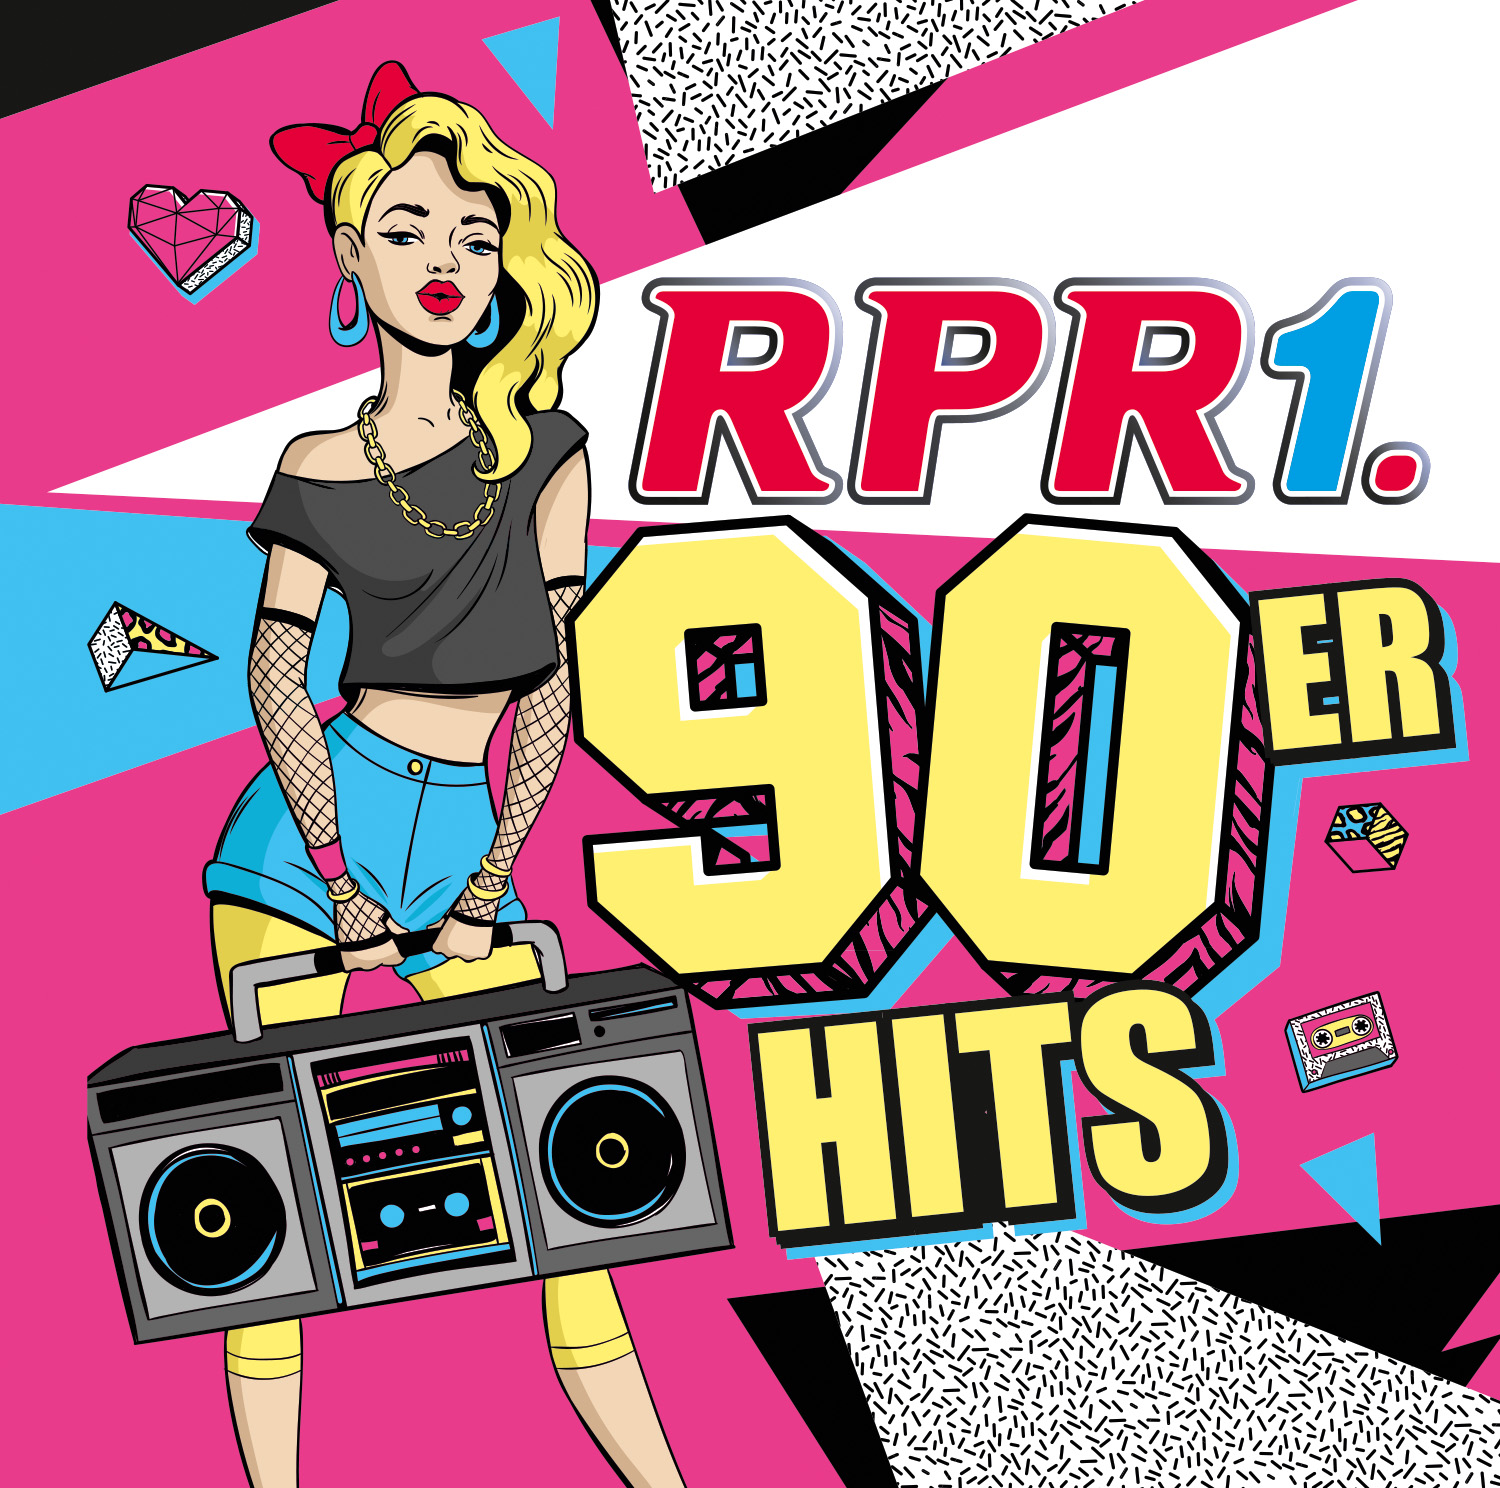 CD RPR1 Hits 90er Years Edition from Various Artists eBay